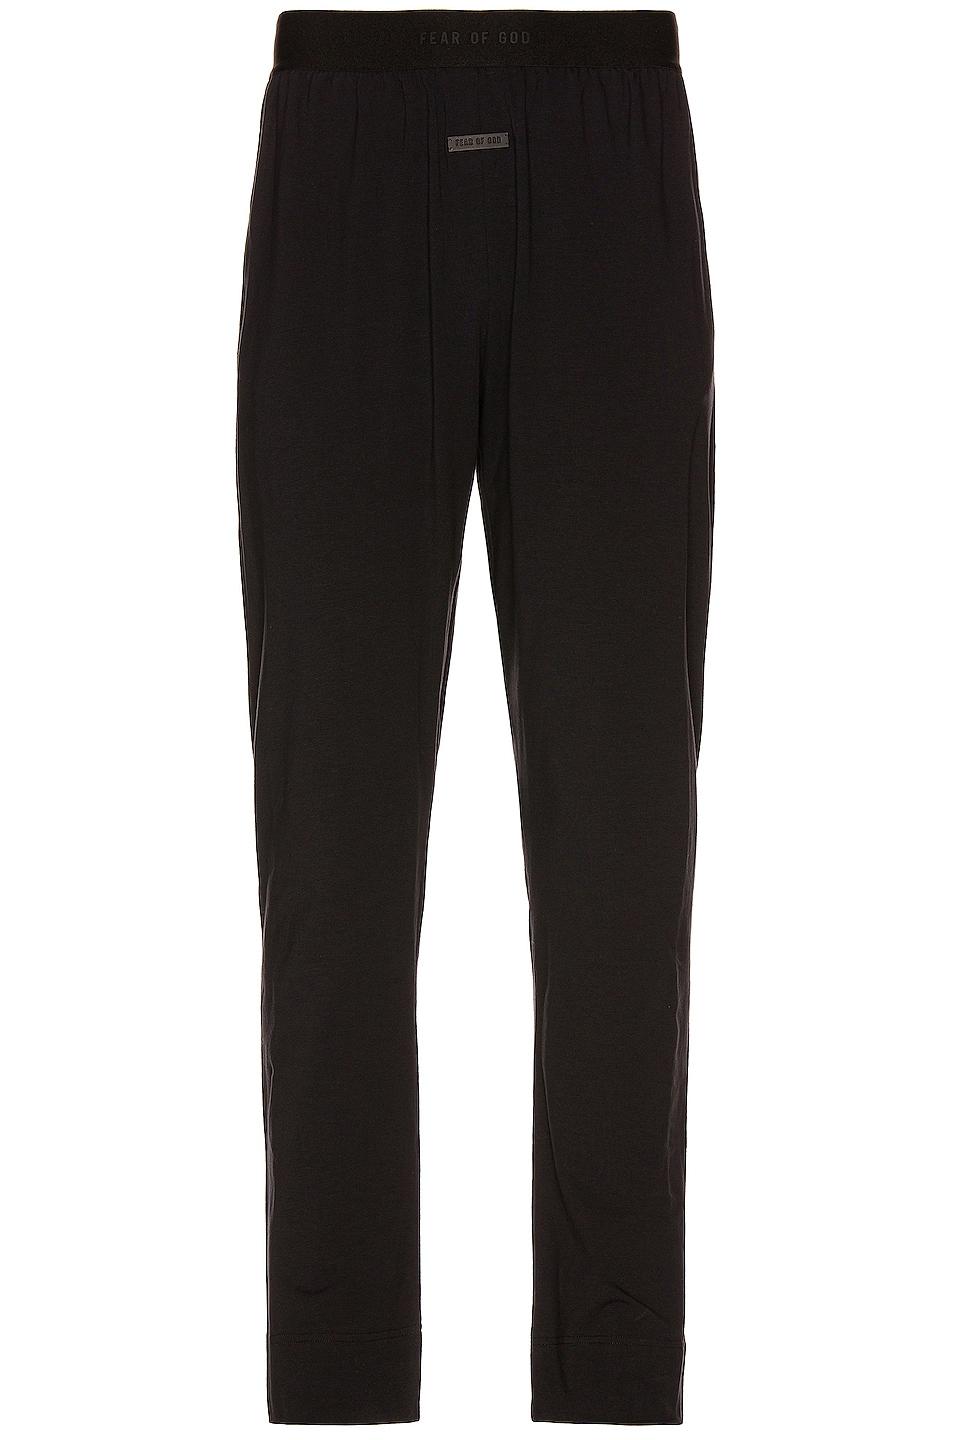 Image 1 of Fear of God Lounge Pant in Black